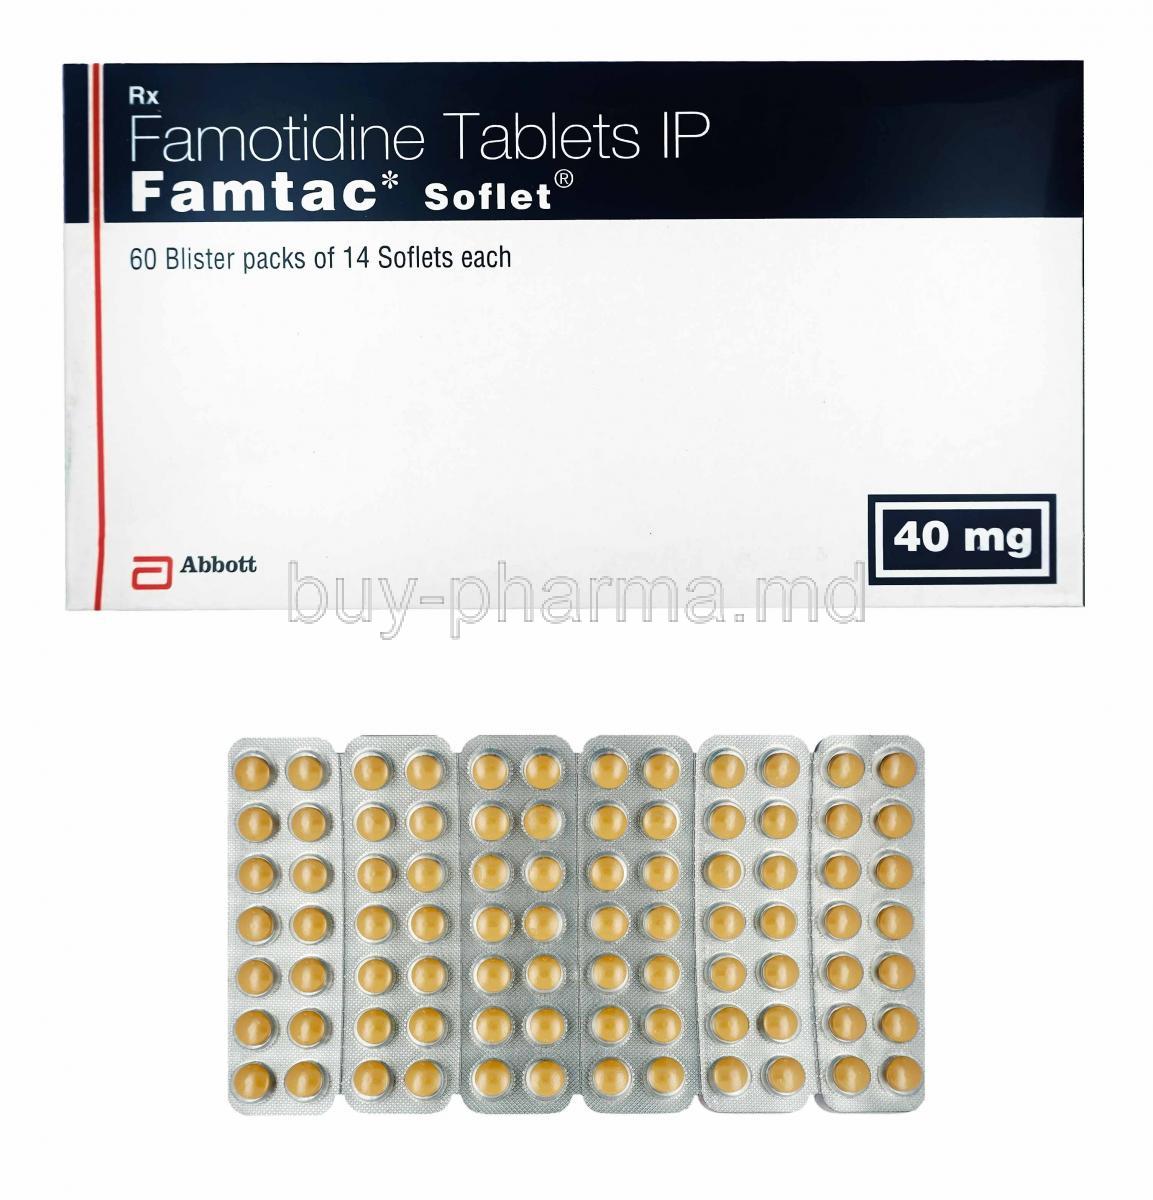 Famtac, Famotidine box and tablets